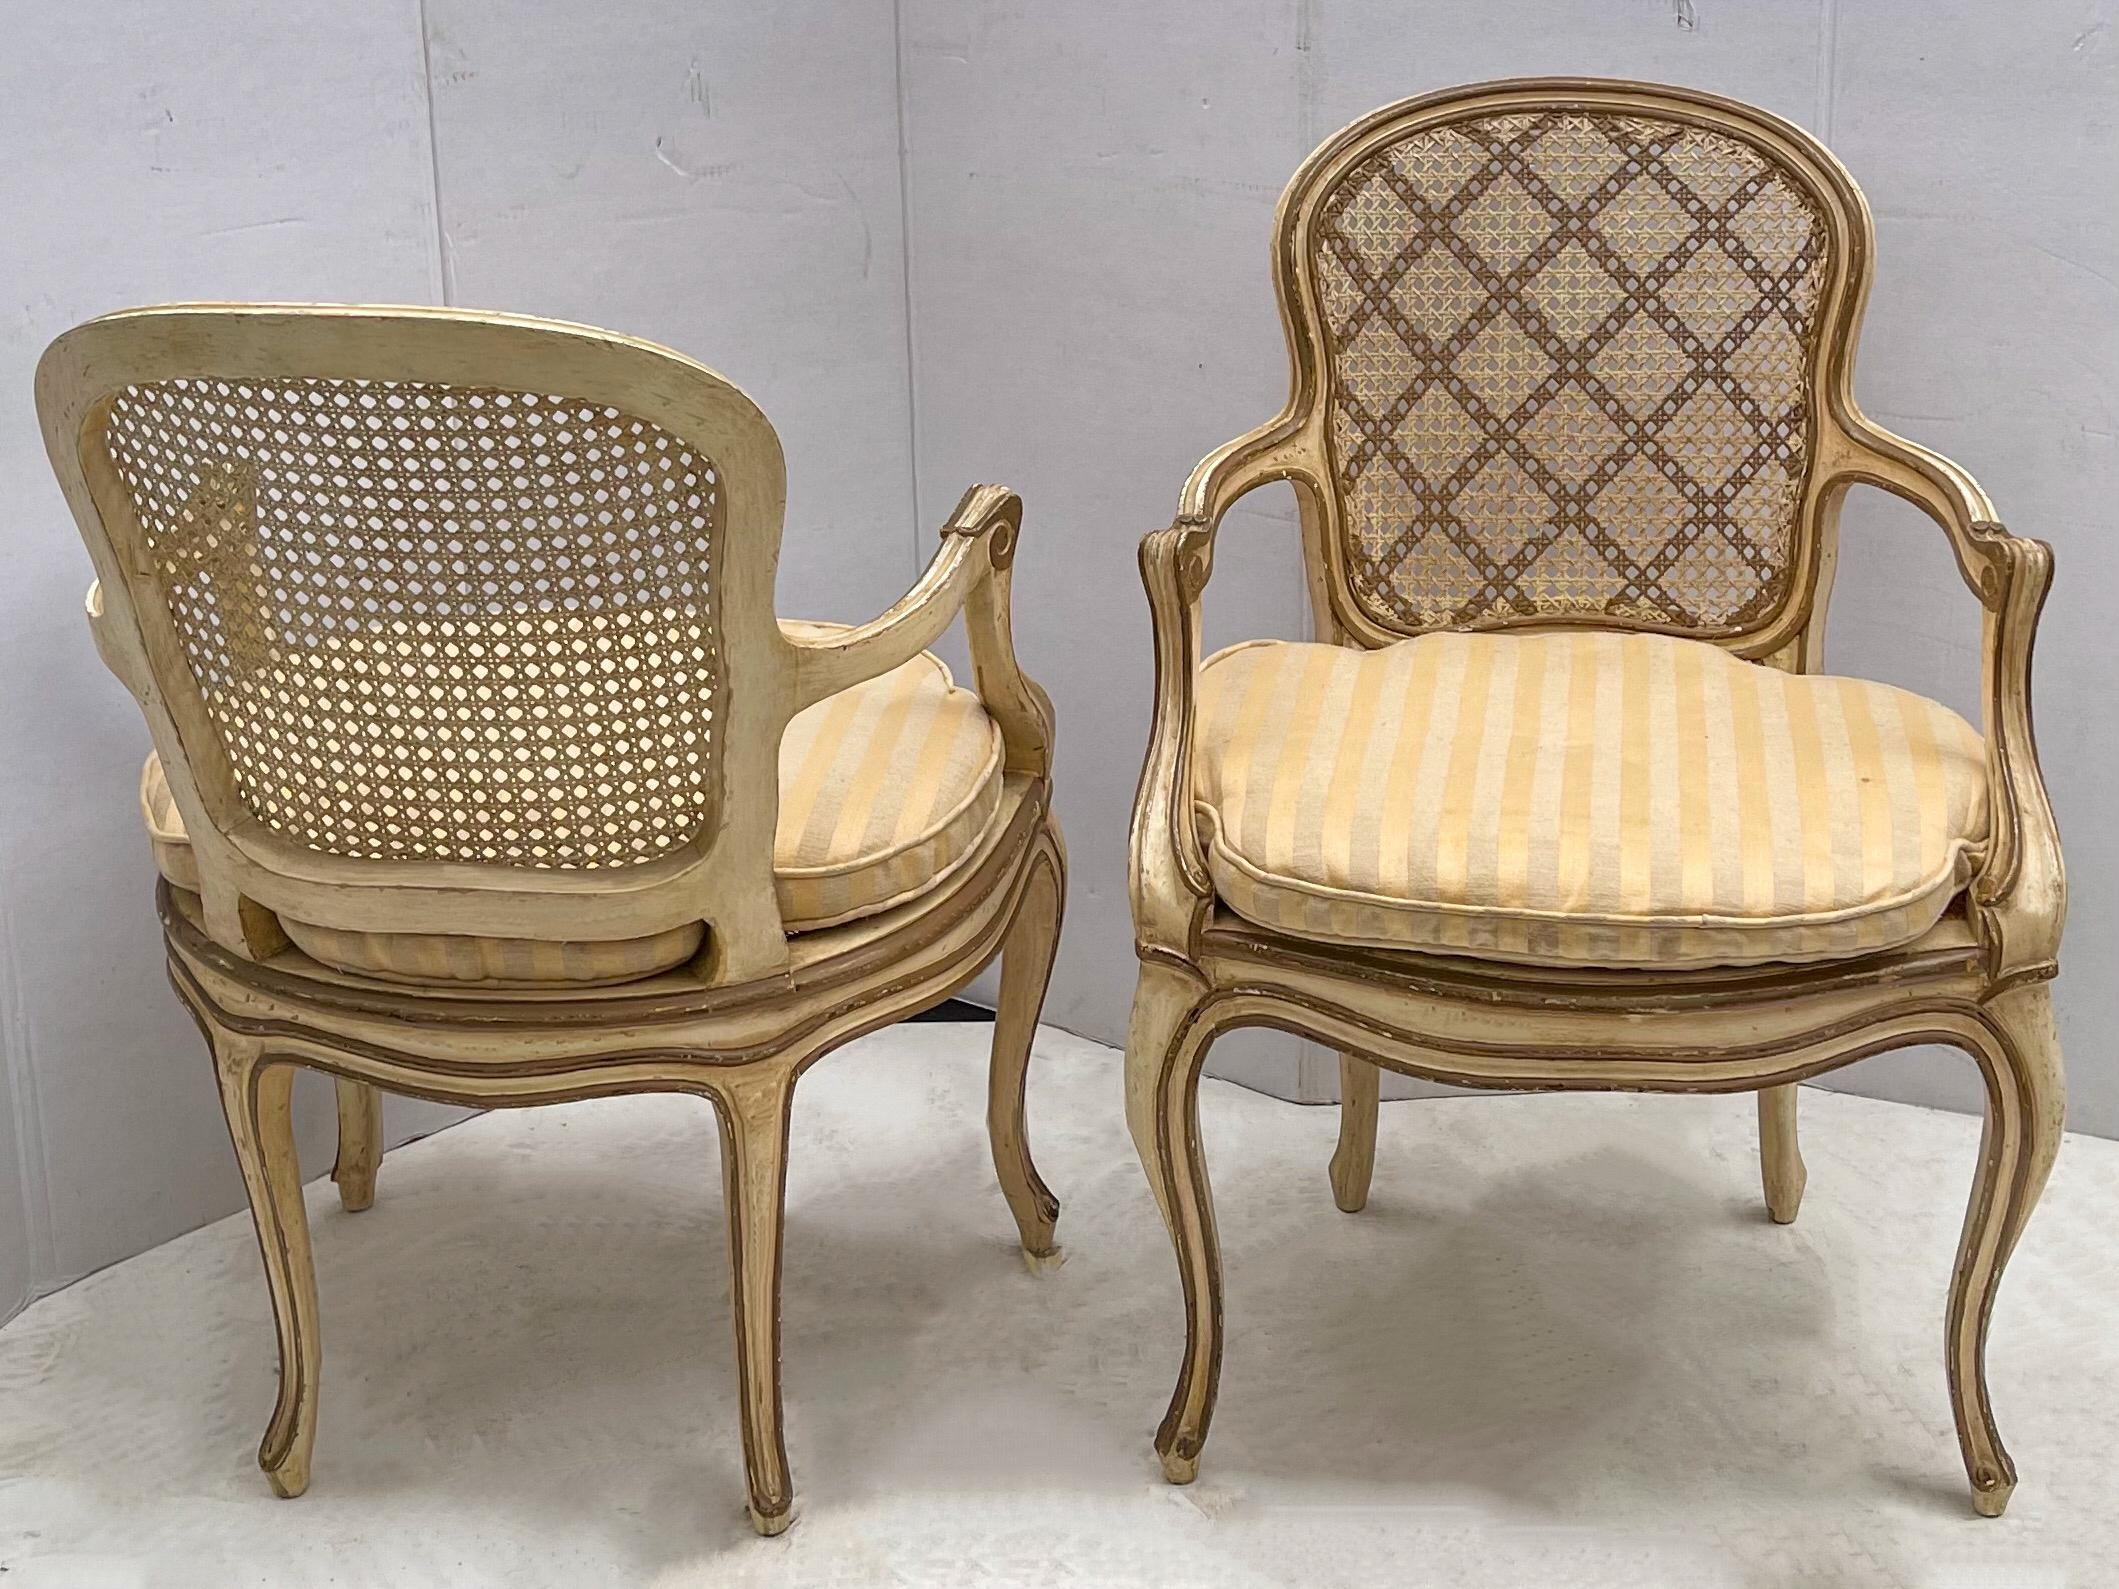 This is a lovely pair of 1950s ivory and gilt painted French bergere chairs. They are in very good condition with some age appropriate patina. The silk striped cushions, however, are vintage and show wear.